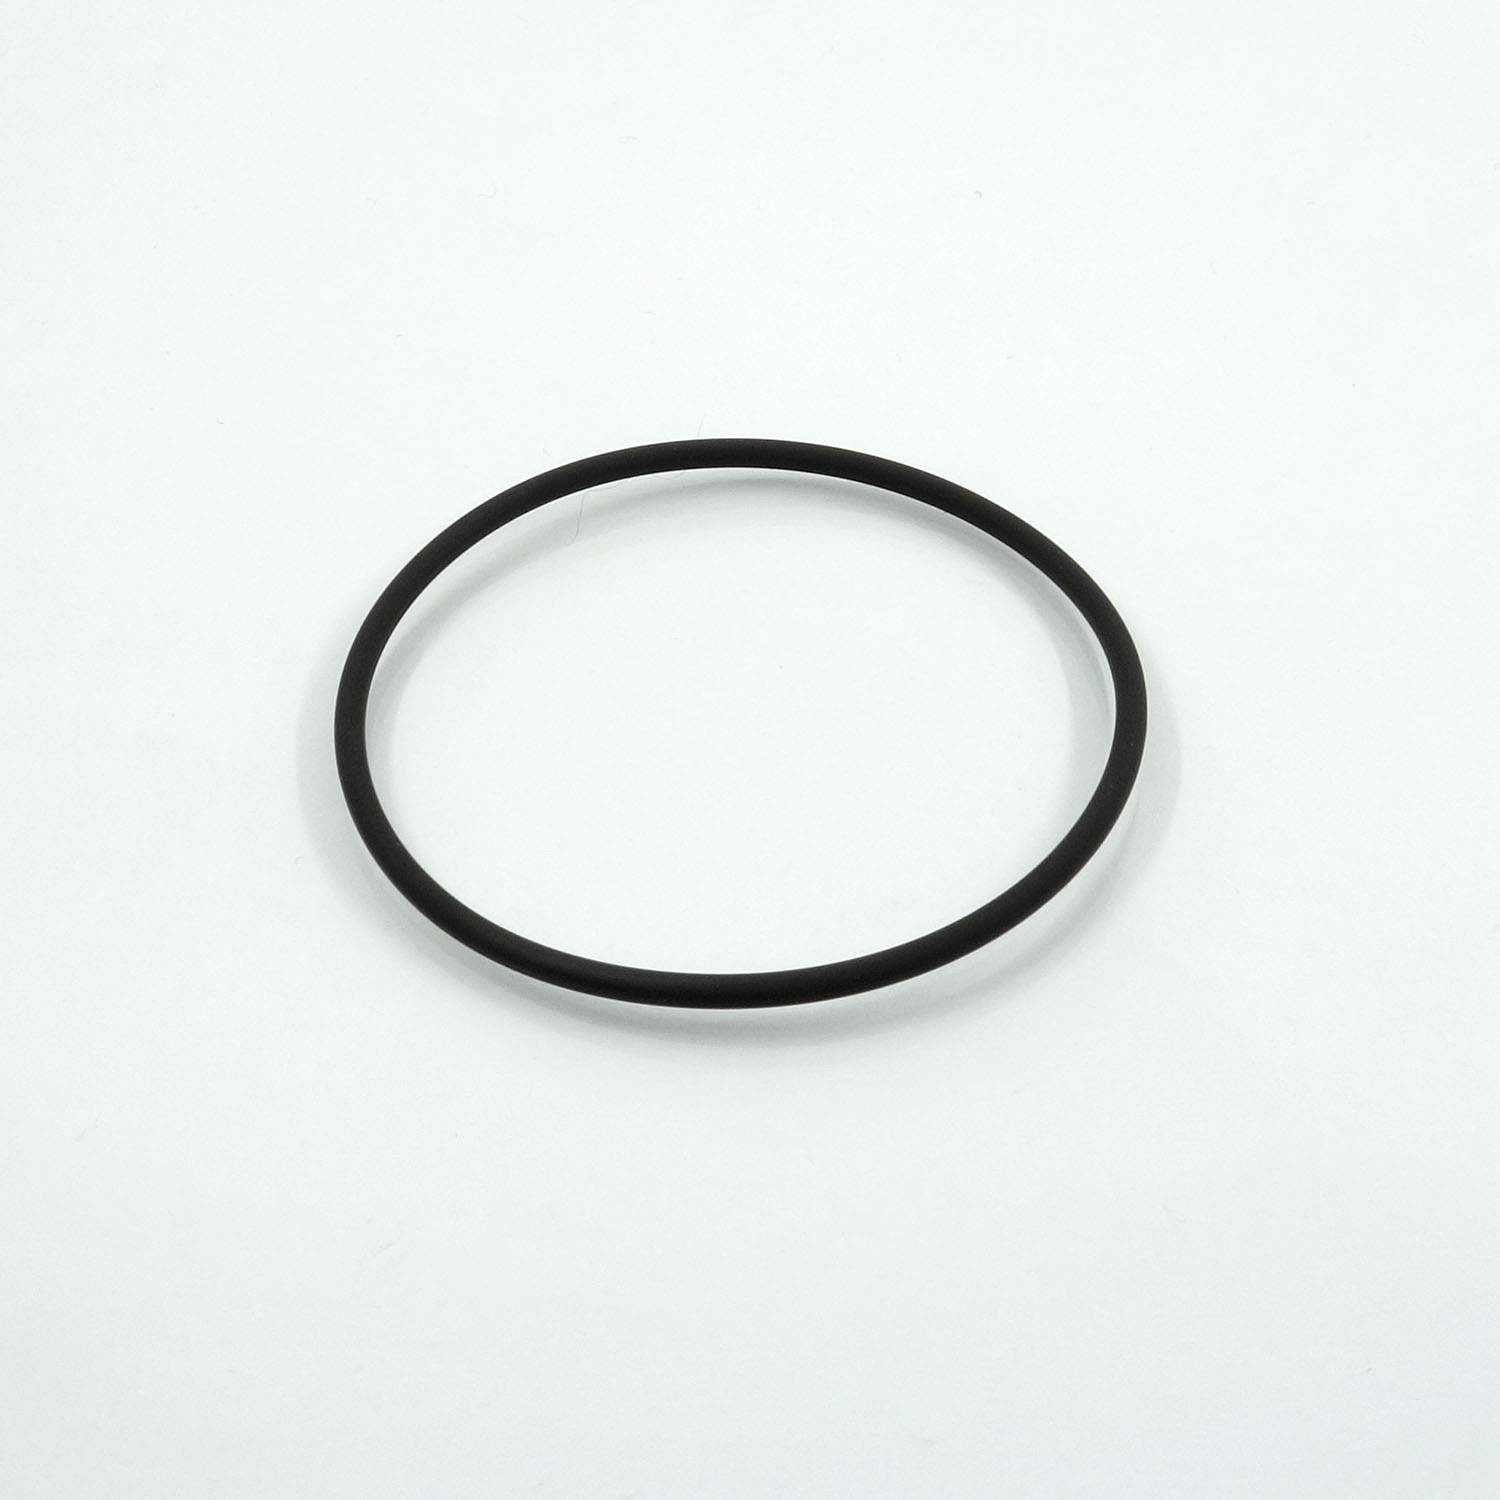 DT466 / 530 Mechanical Injector Seal Kit | Fuel Injector Seal Kit